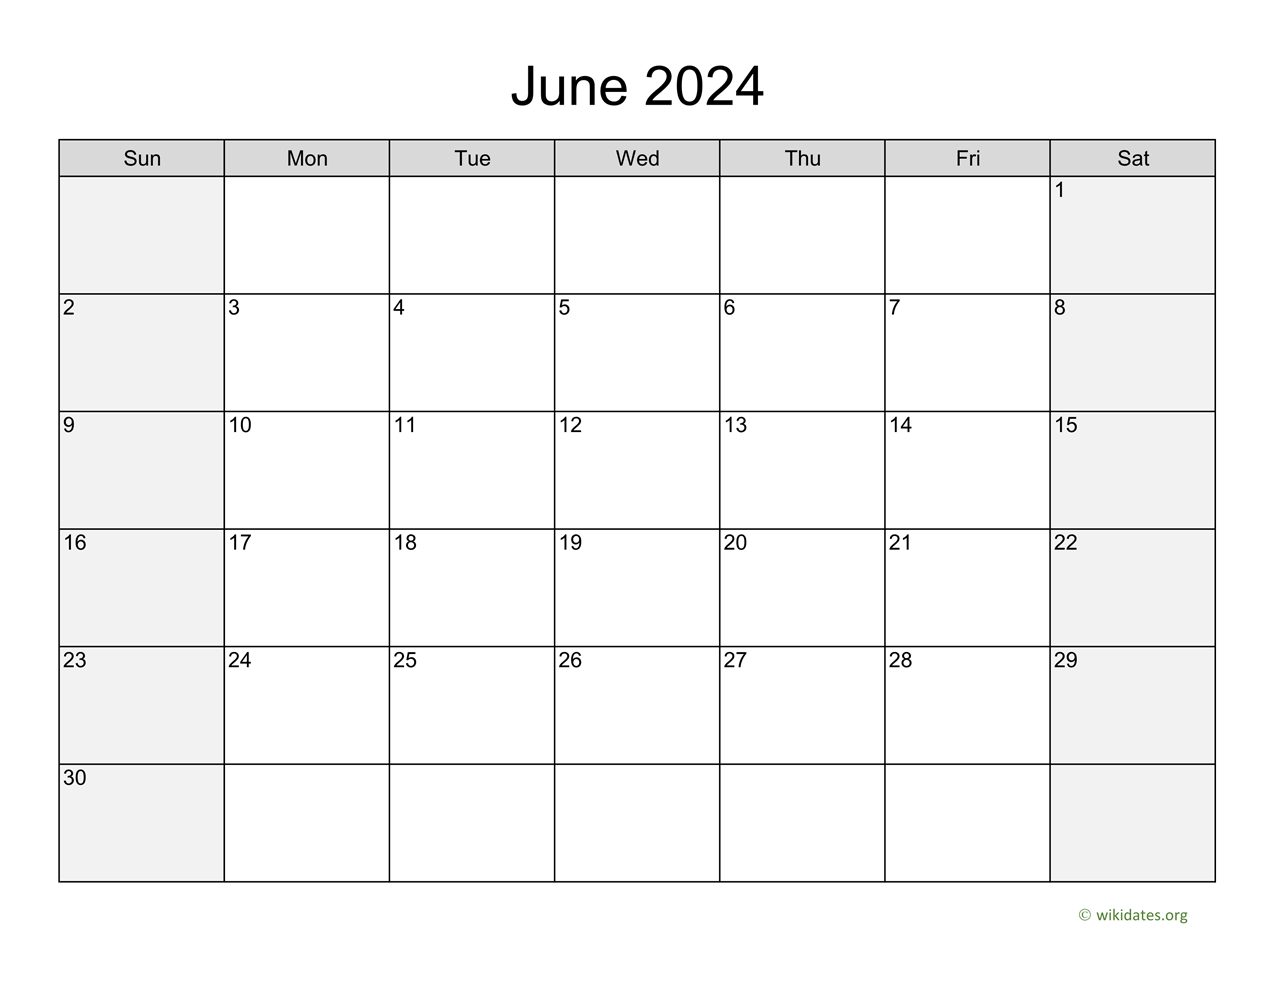 June 2024 Calendar with Weekend Shaded | WikiDates.org